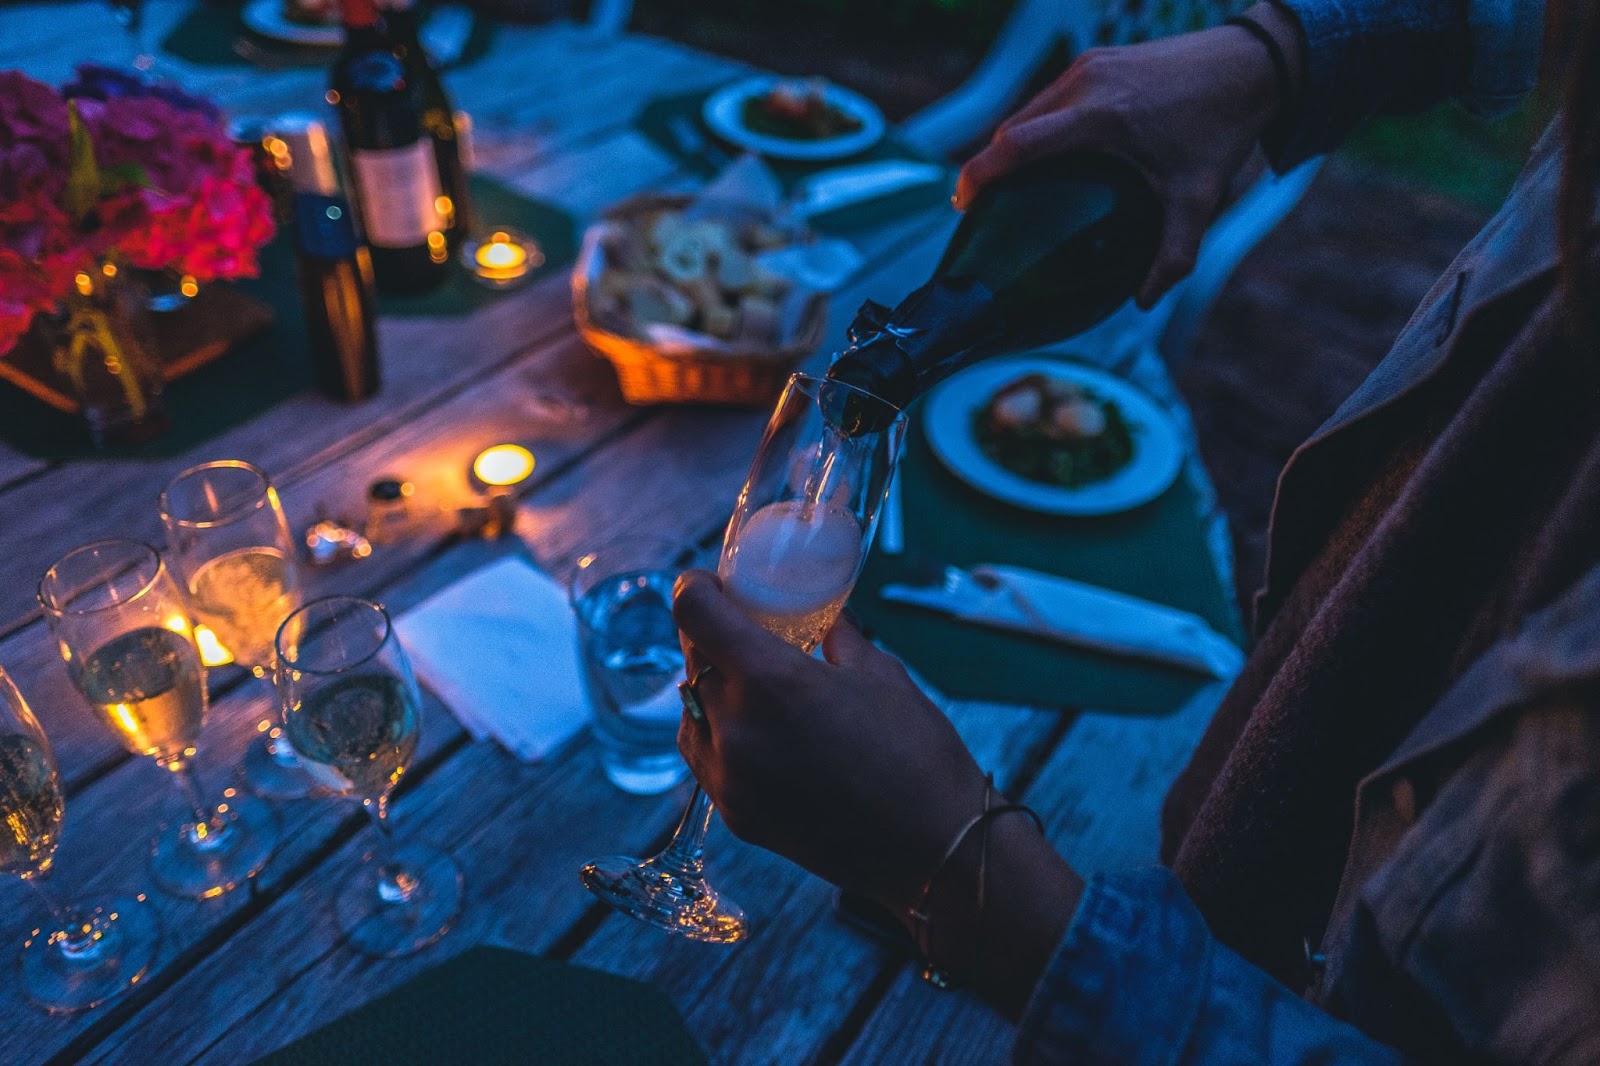 A person pours sparkling wine into a flute glass at a dimly lit outdoor dining table adorned with candles, creating a cozy and inviting atmosphere.